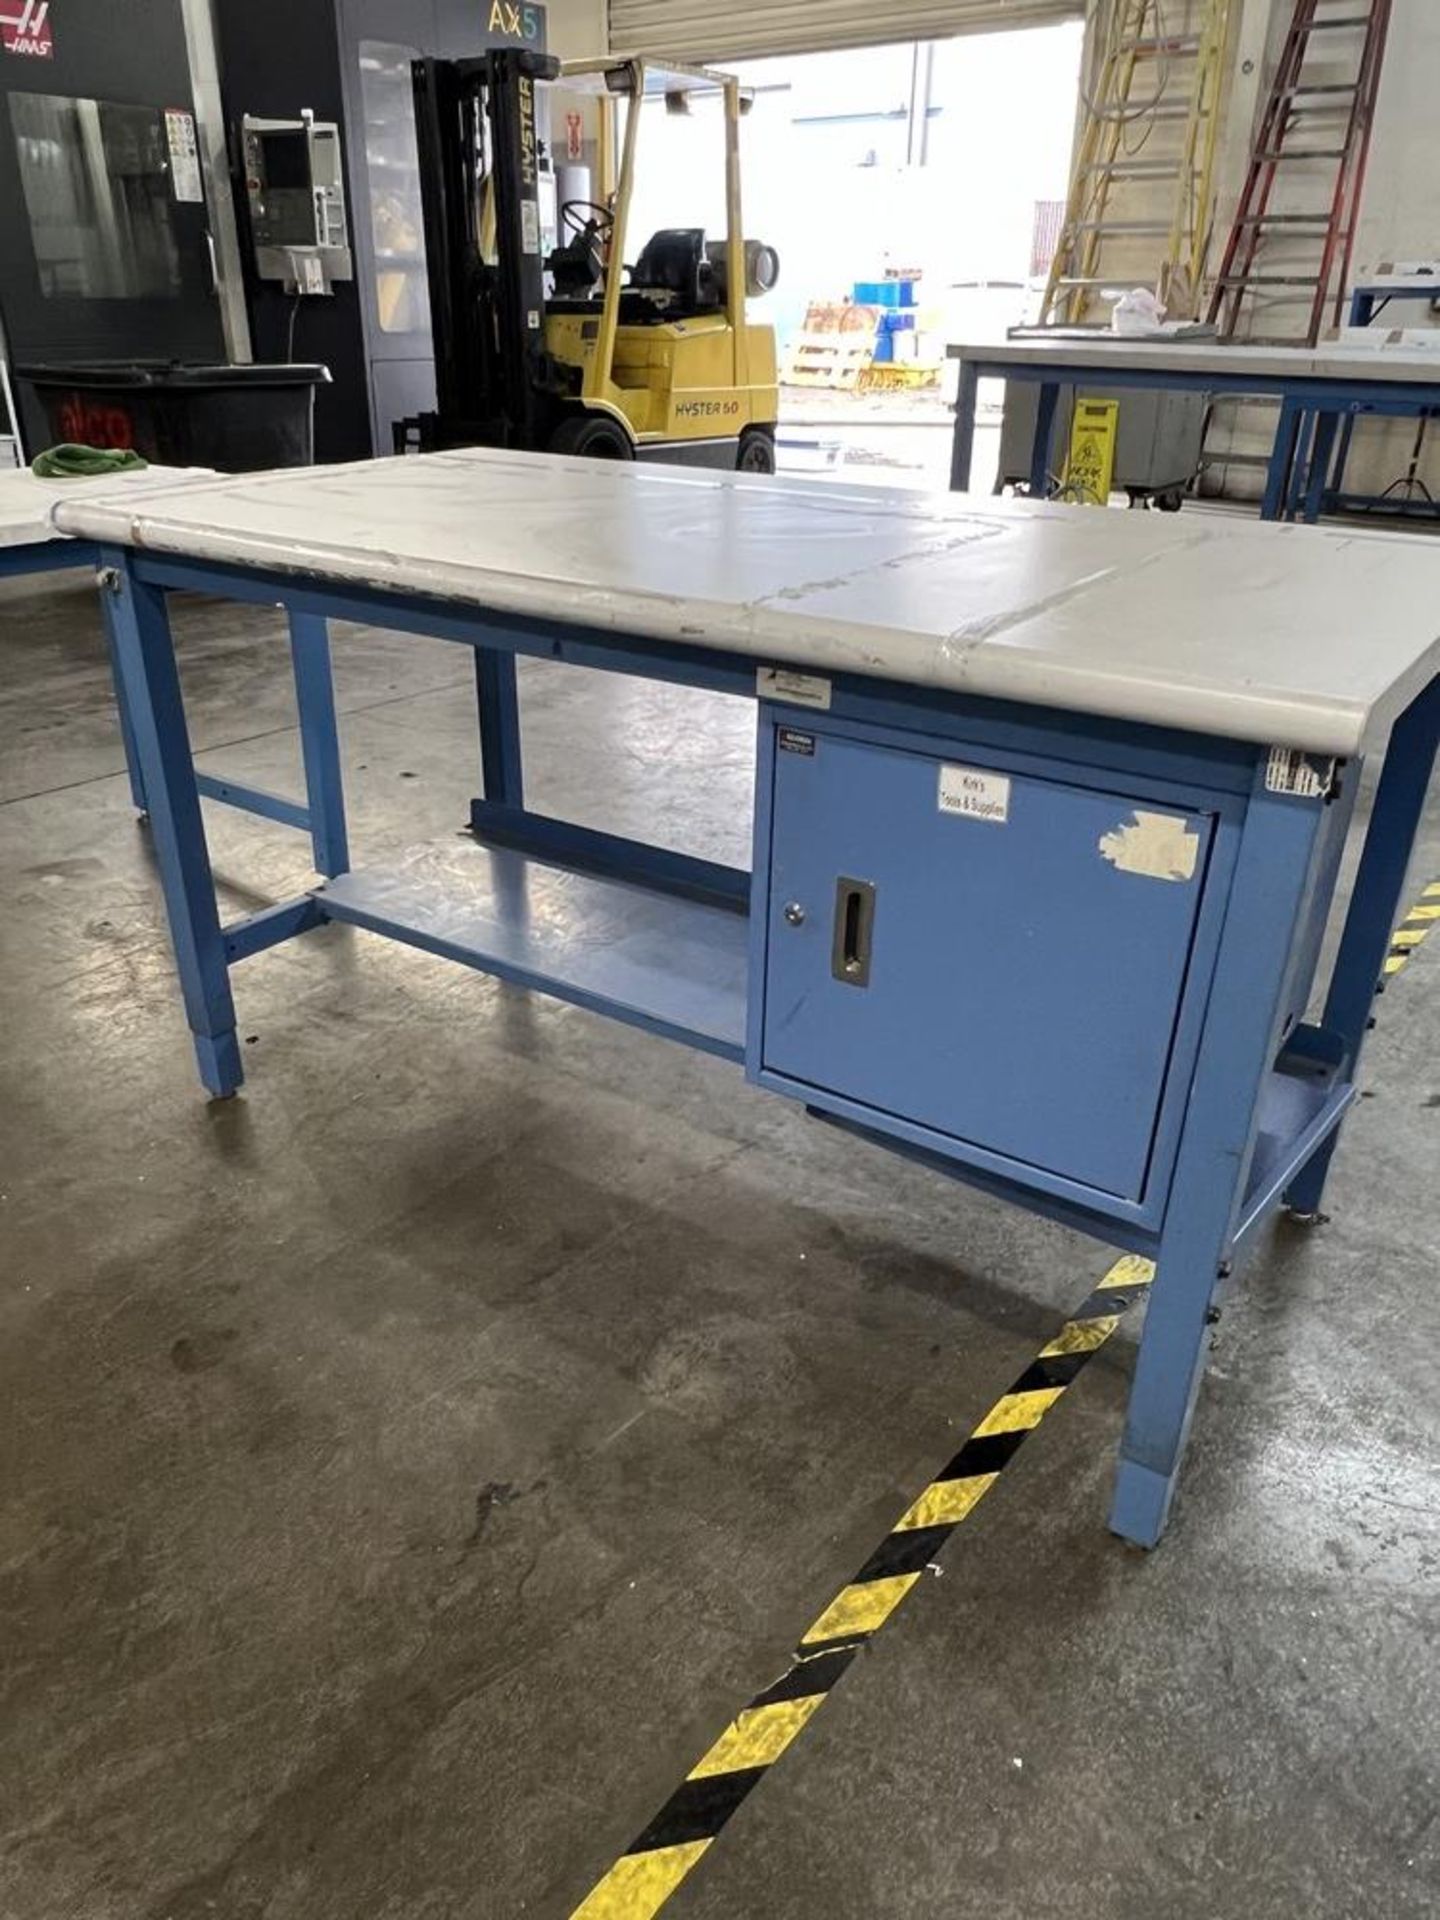 2 Tier Global Industrial Adjustable Work Table with Cabinet - Image 2 of 4